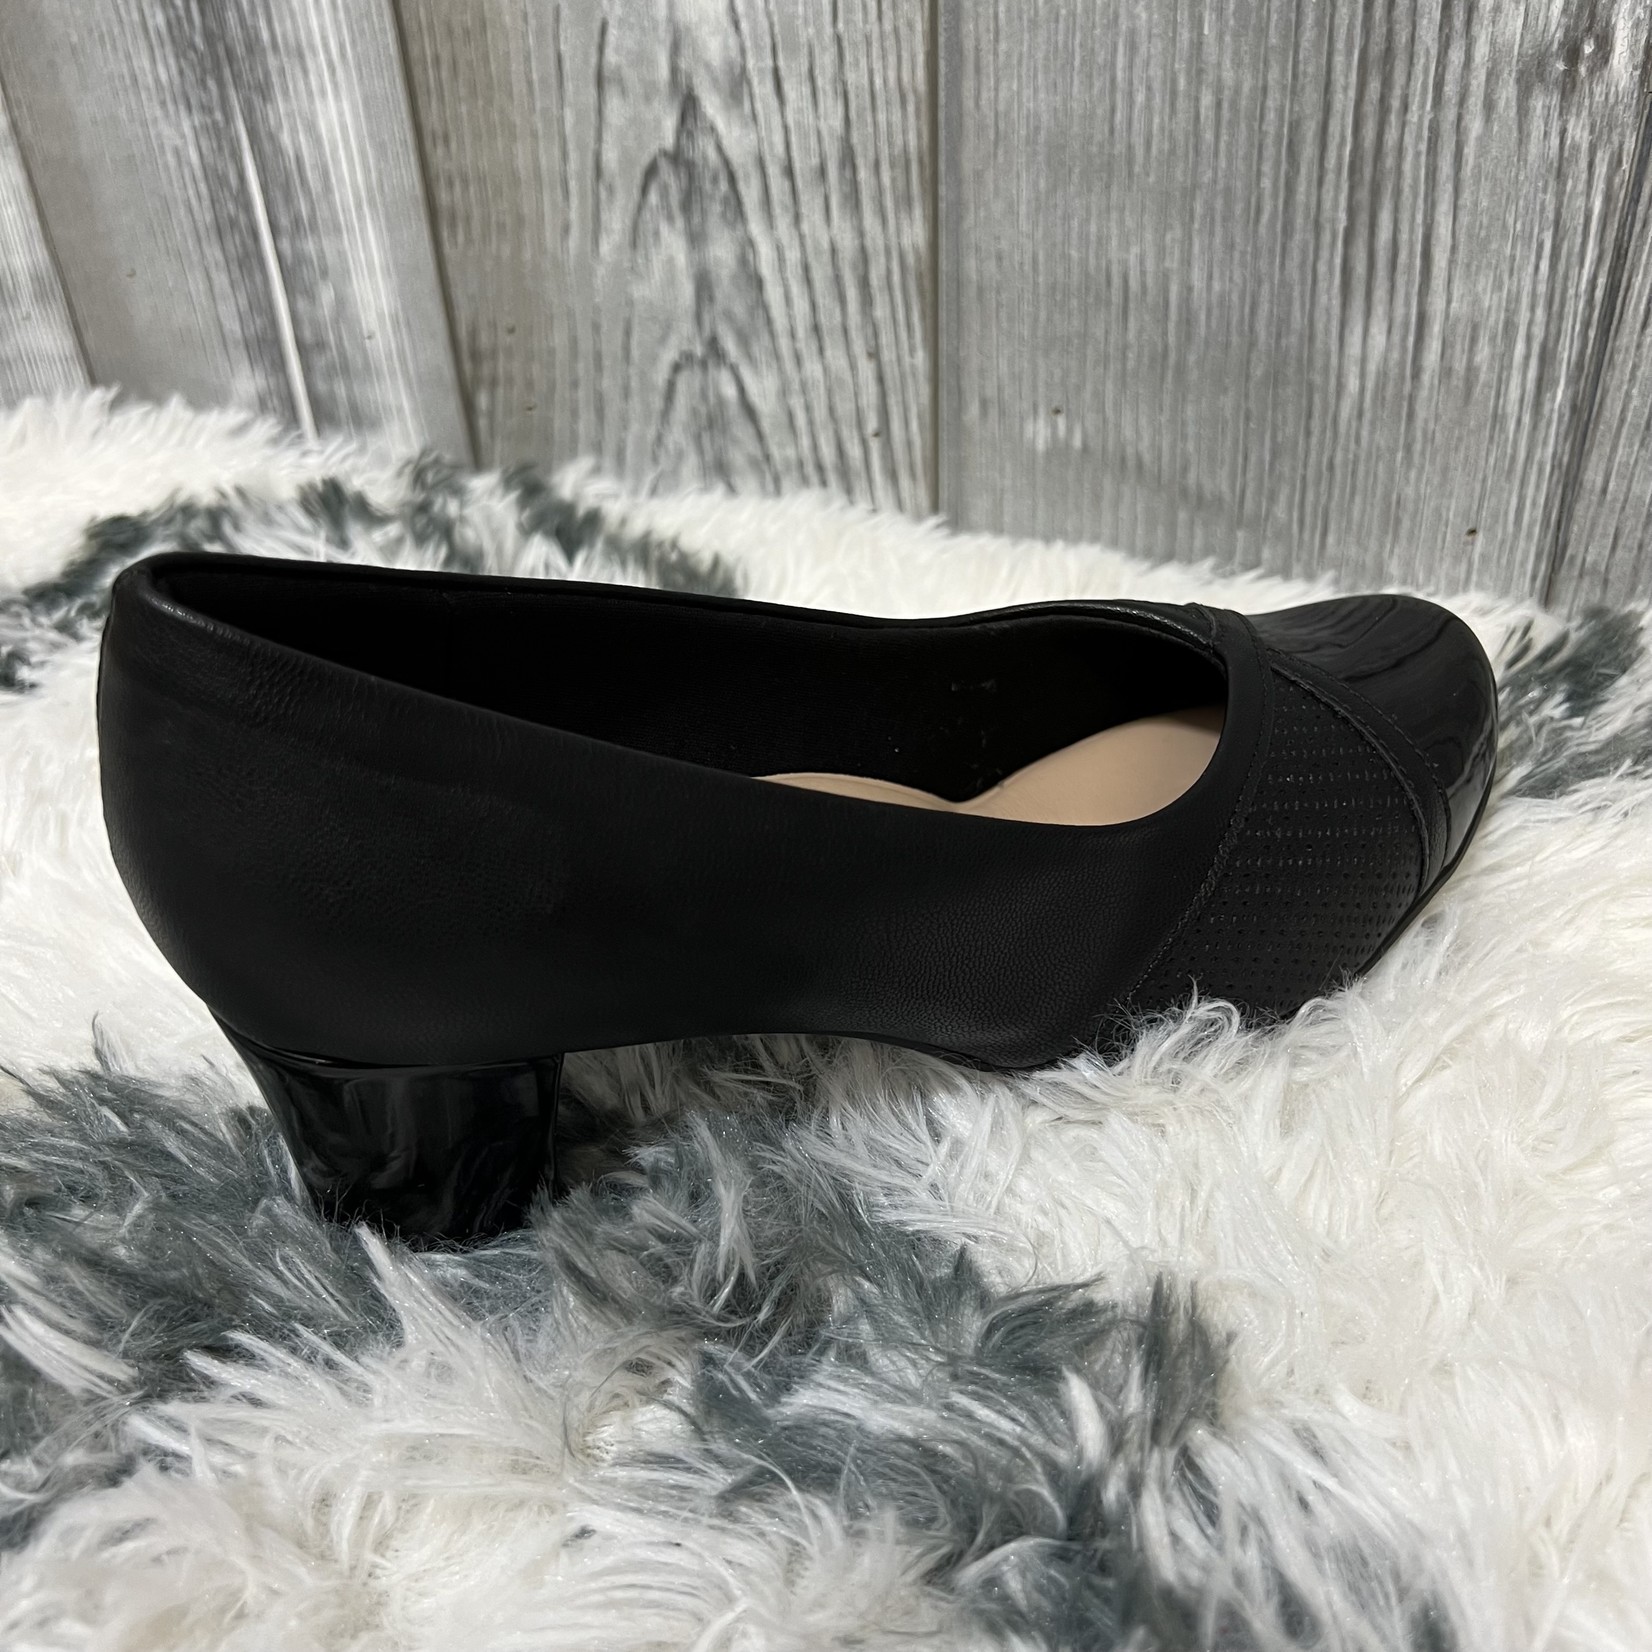 Piccadilly Black 110137-8 Bunion Friendly Square Heel